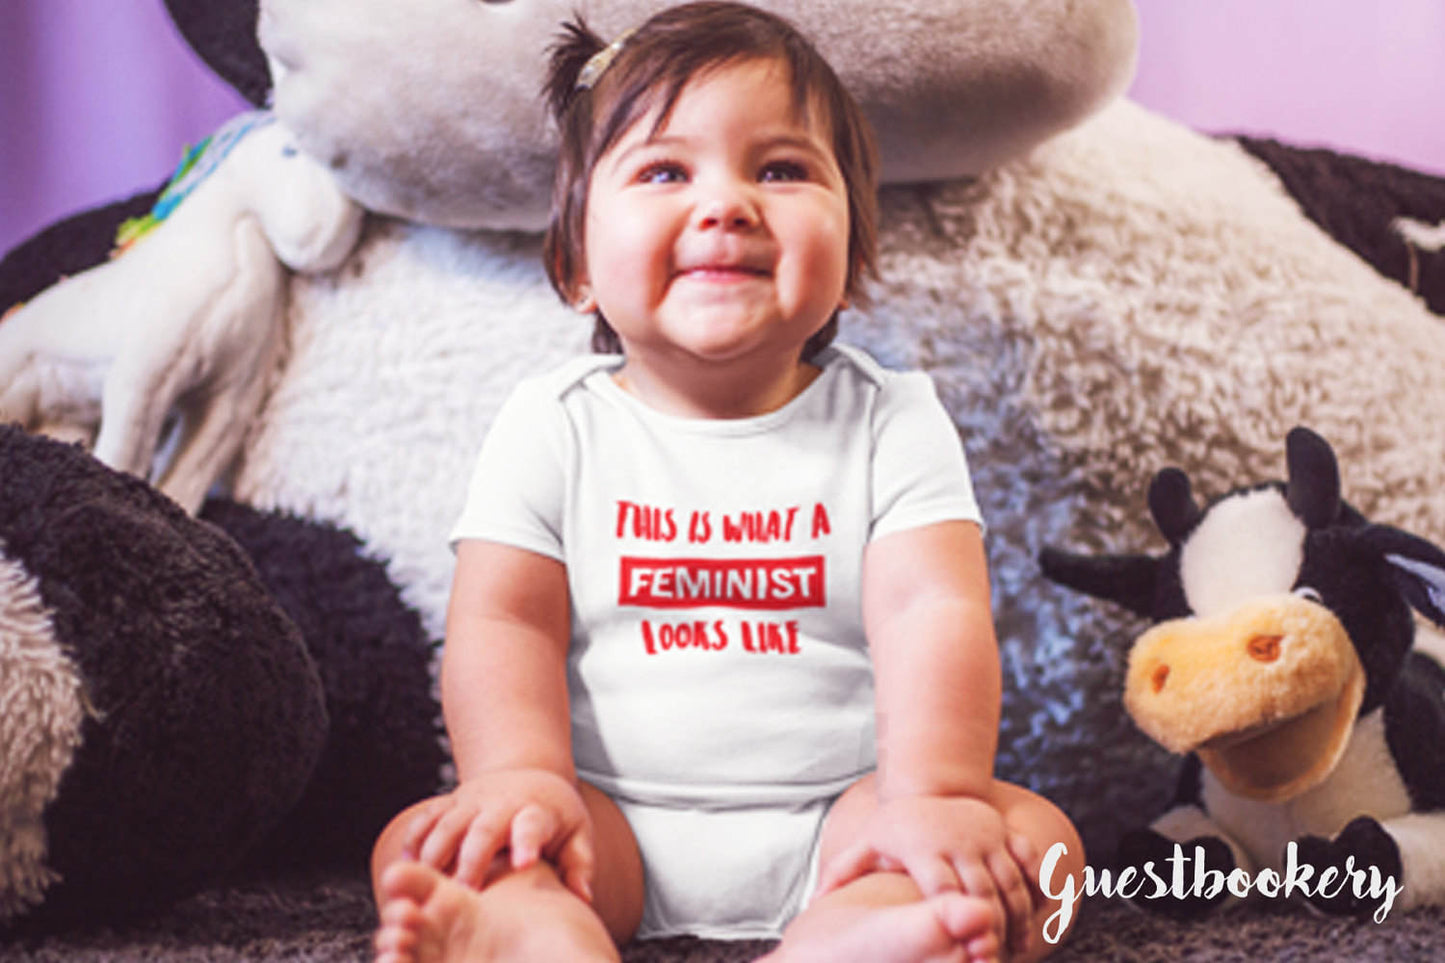 This is What a Feminist Looks Like Onesie